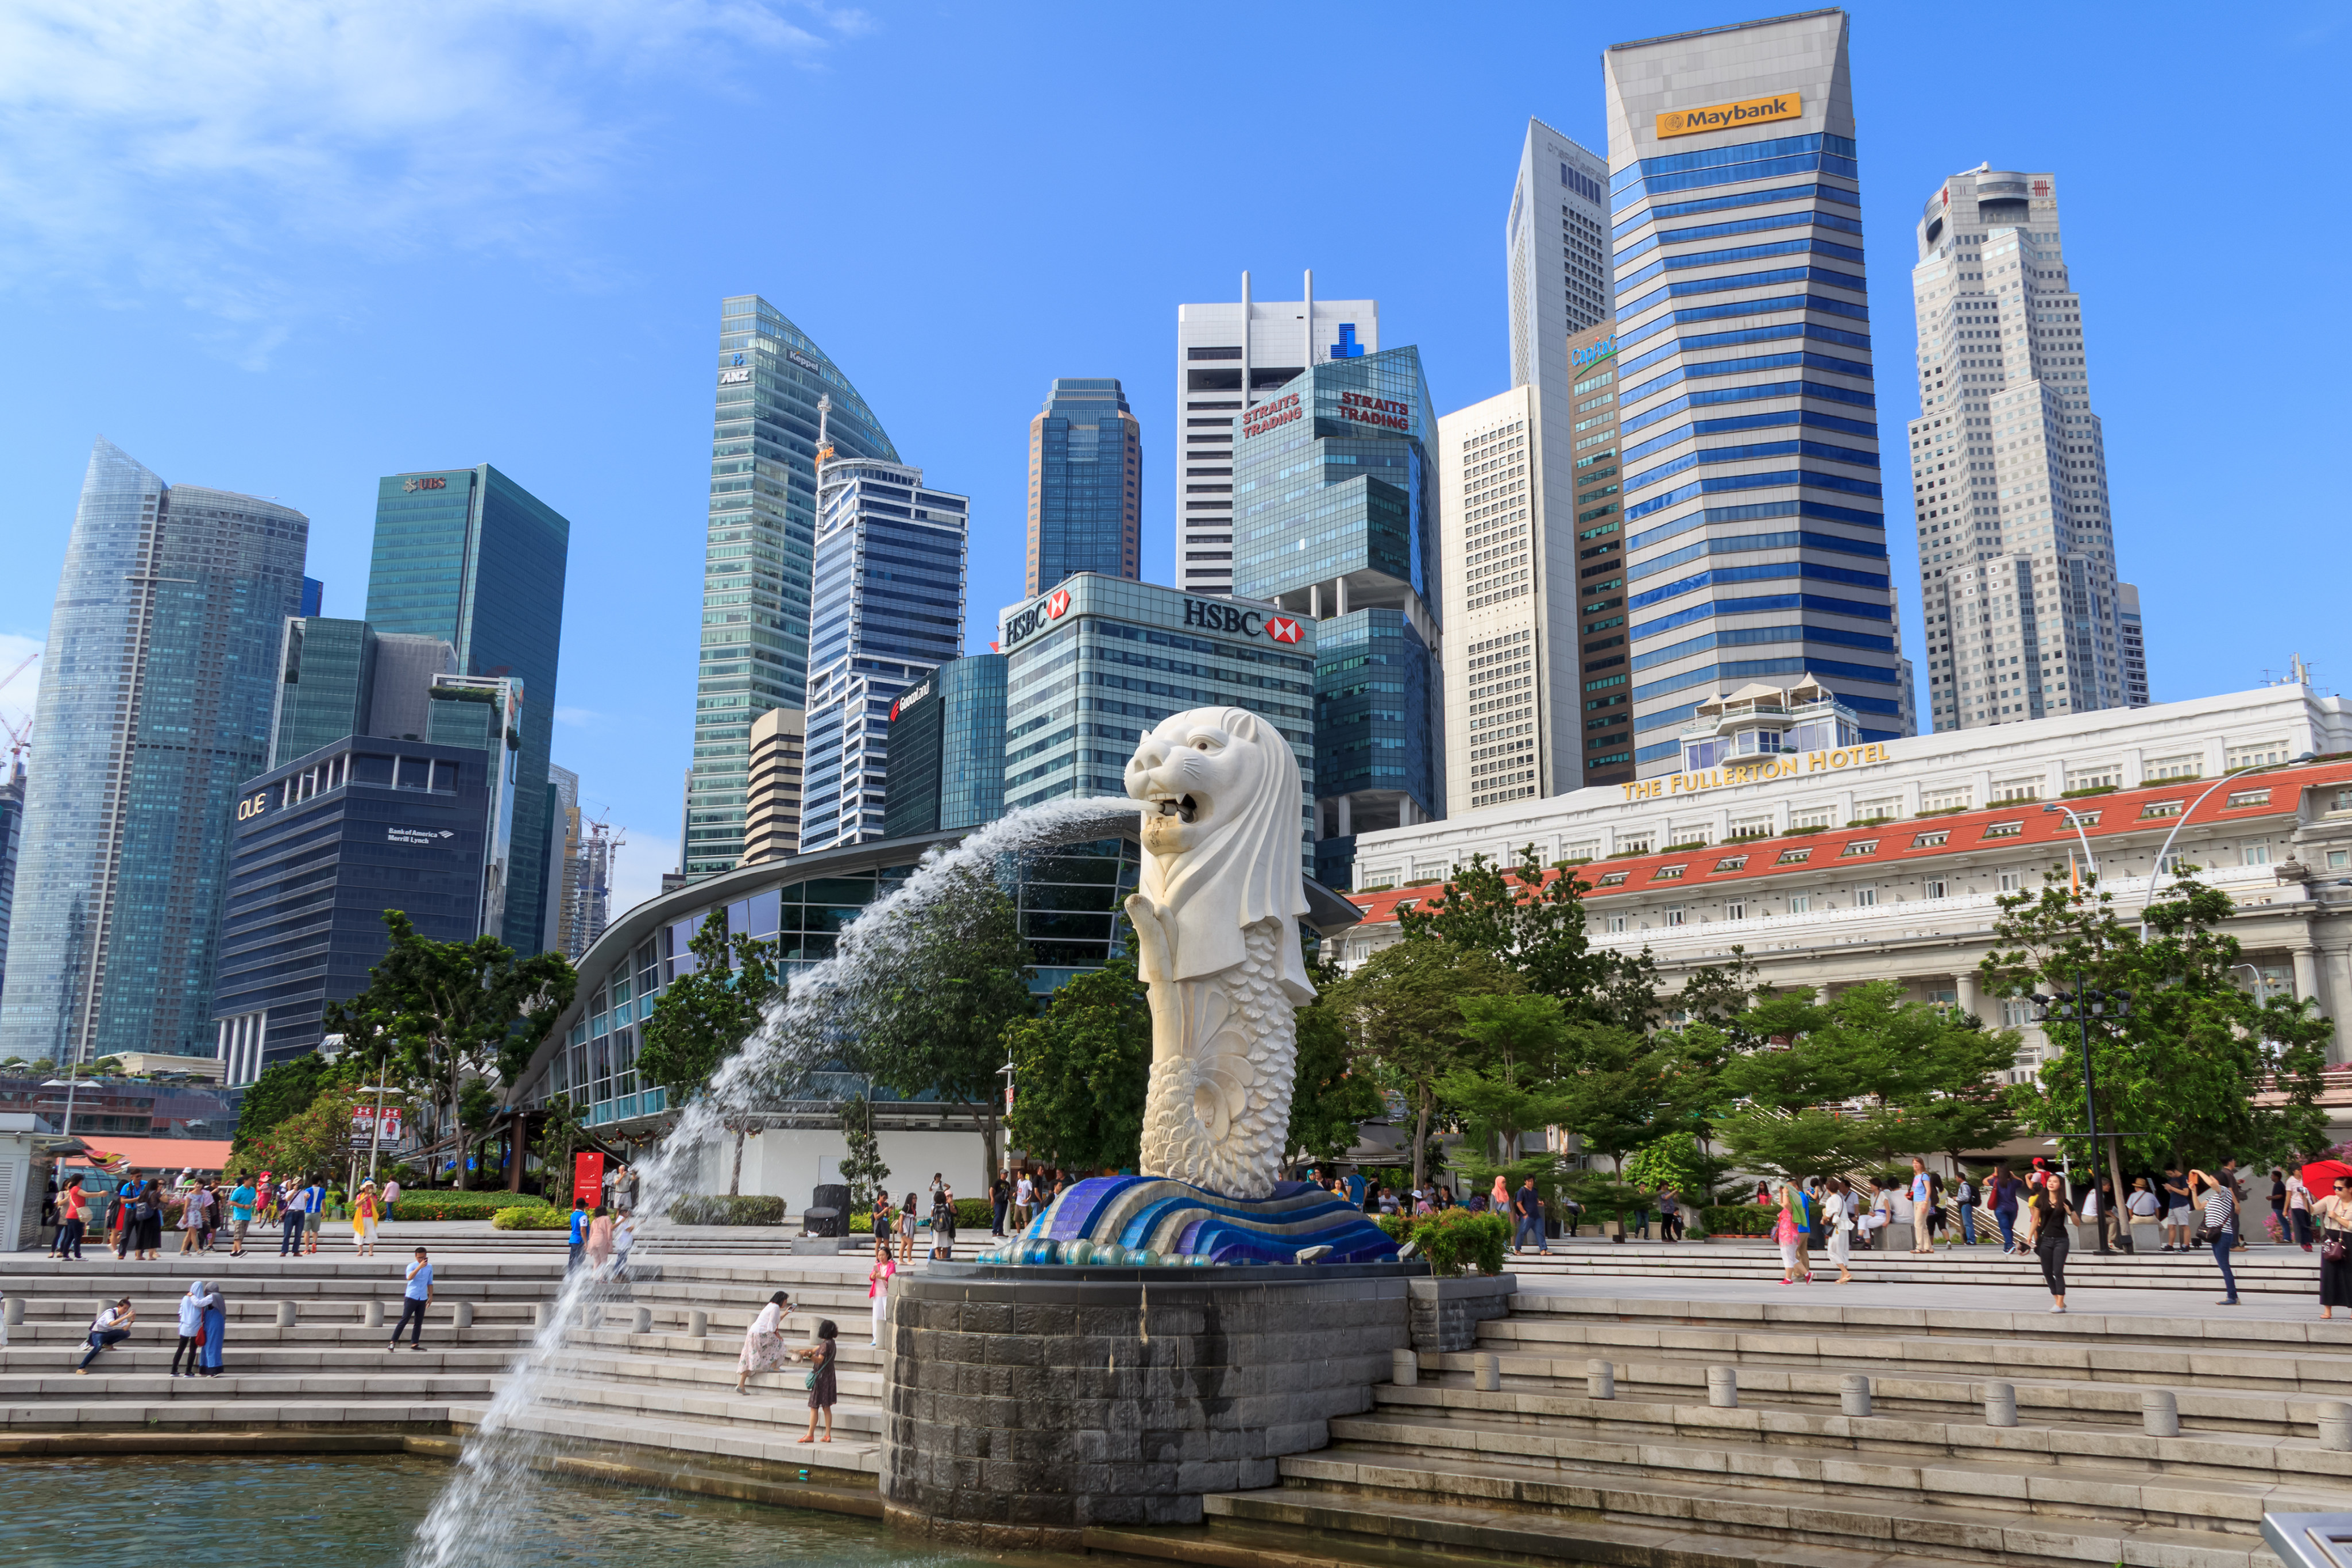 Singapore’s skyline. A man, 48, was sentenced to eight years’ jail on Monday for sexually abusing three boys between 1993 and 1995. Photo: Shutterstock